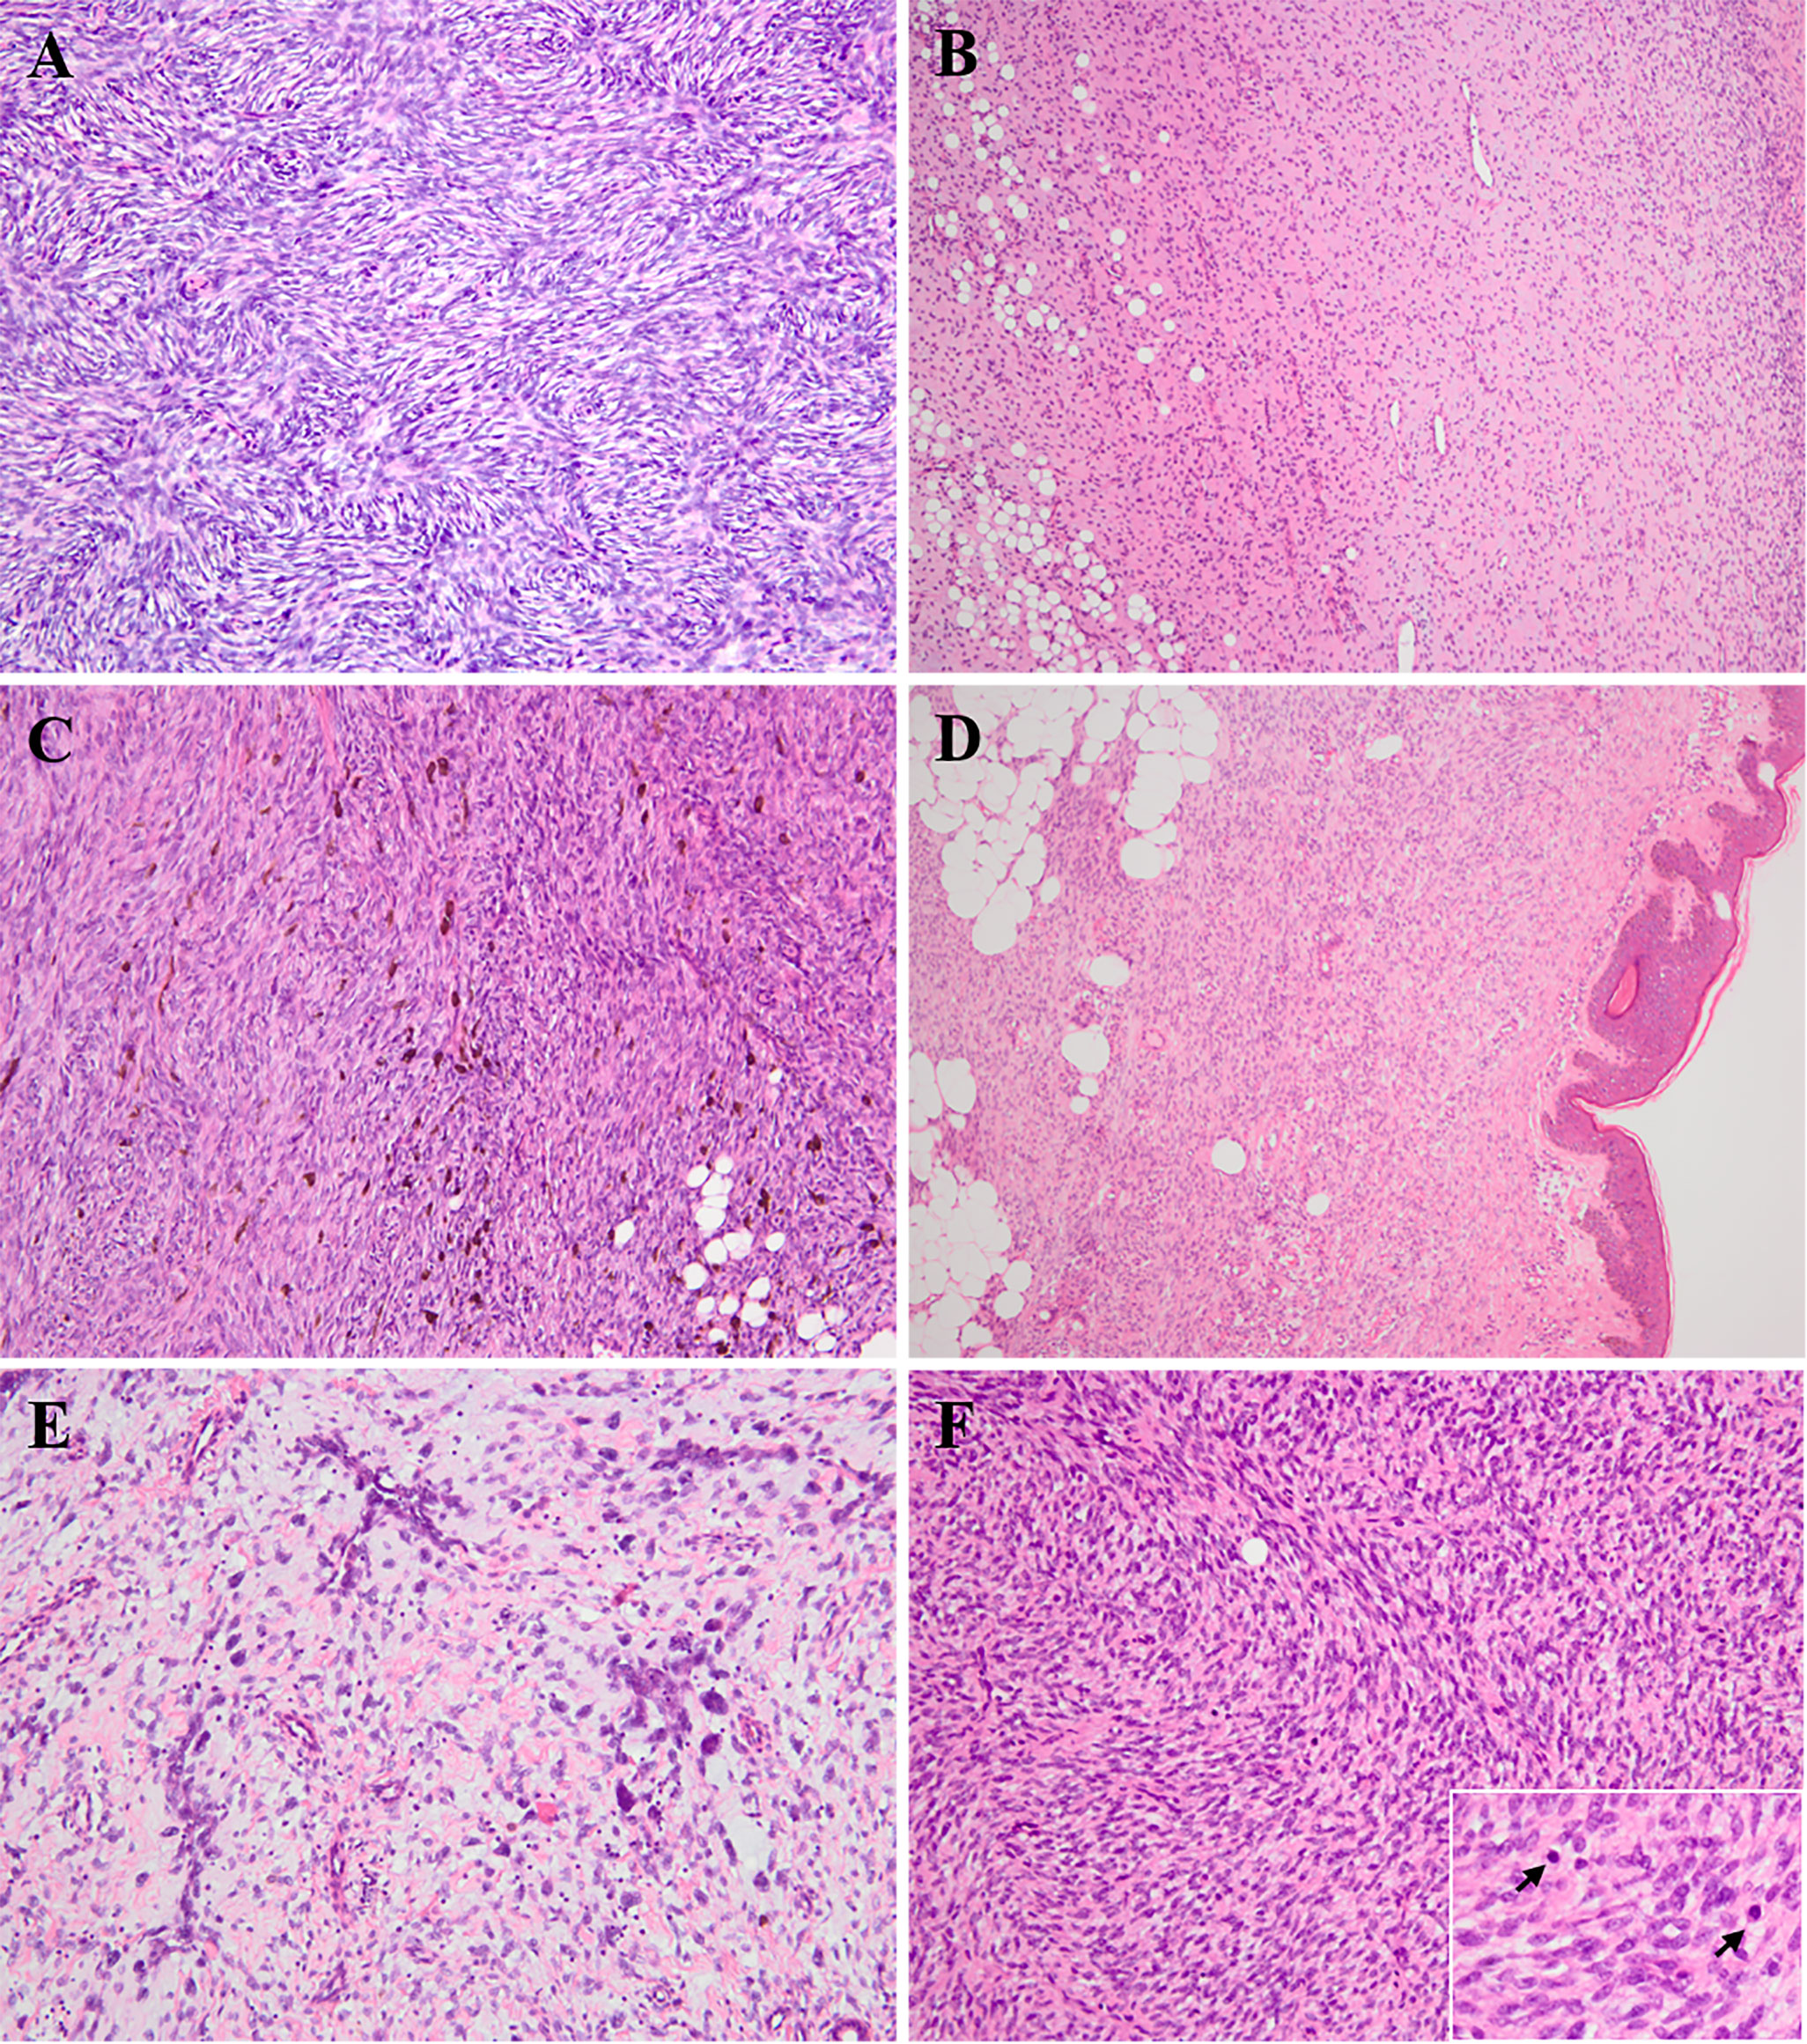 Frontiers  Pediatric dermatofibrosarcoma protuberans: A clinicopathologic  and genetic analysis of 66 cases in the largest institution in Southwest  China